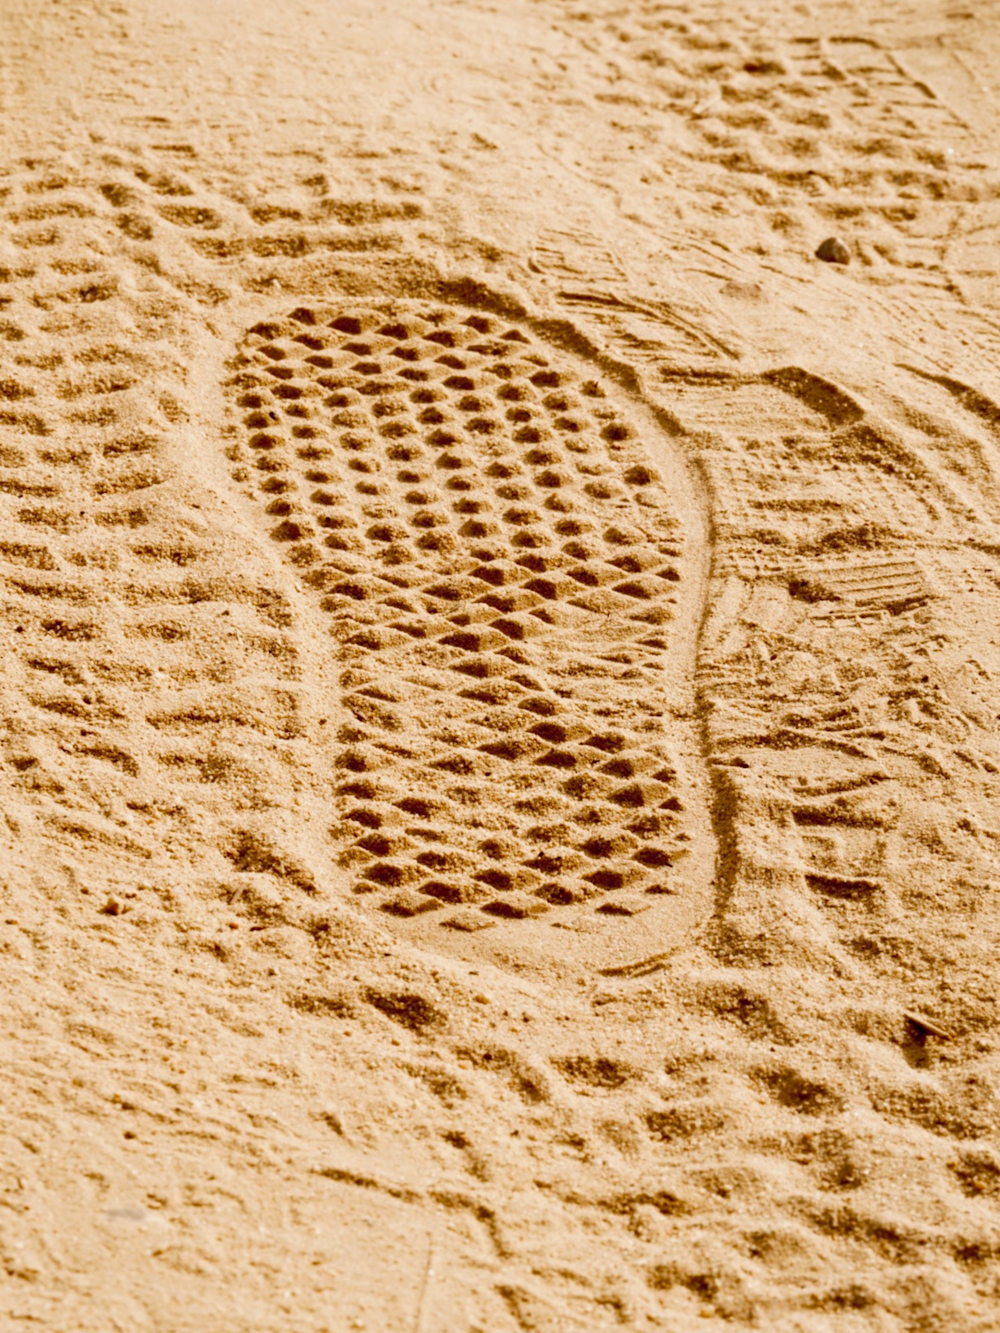 a person's foot prints in the sand on a beach